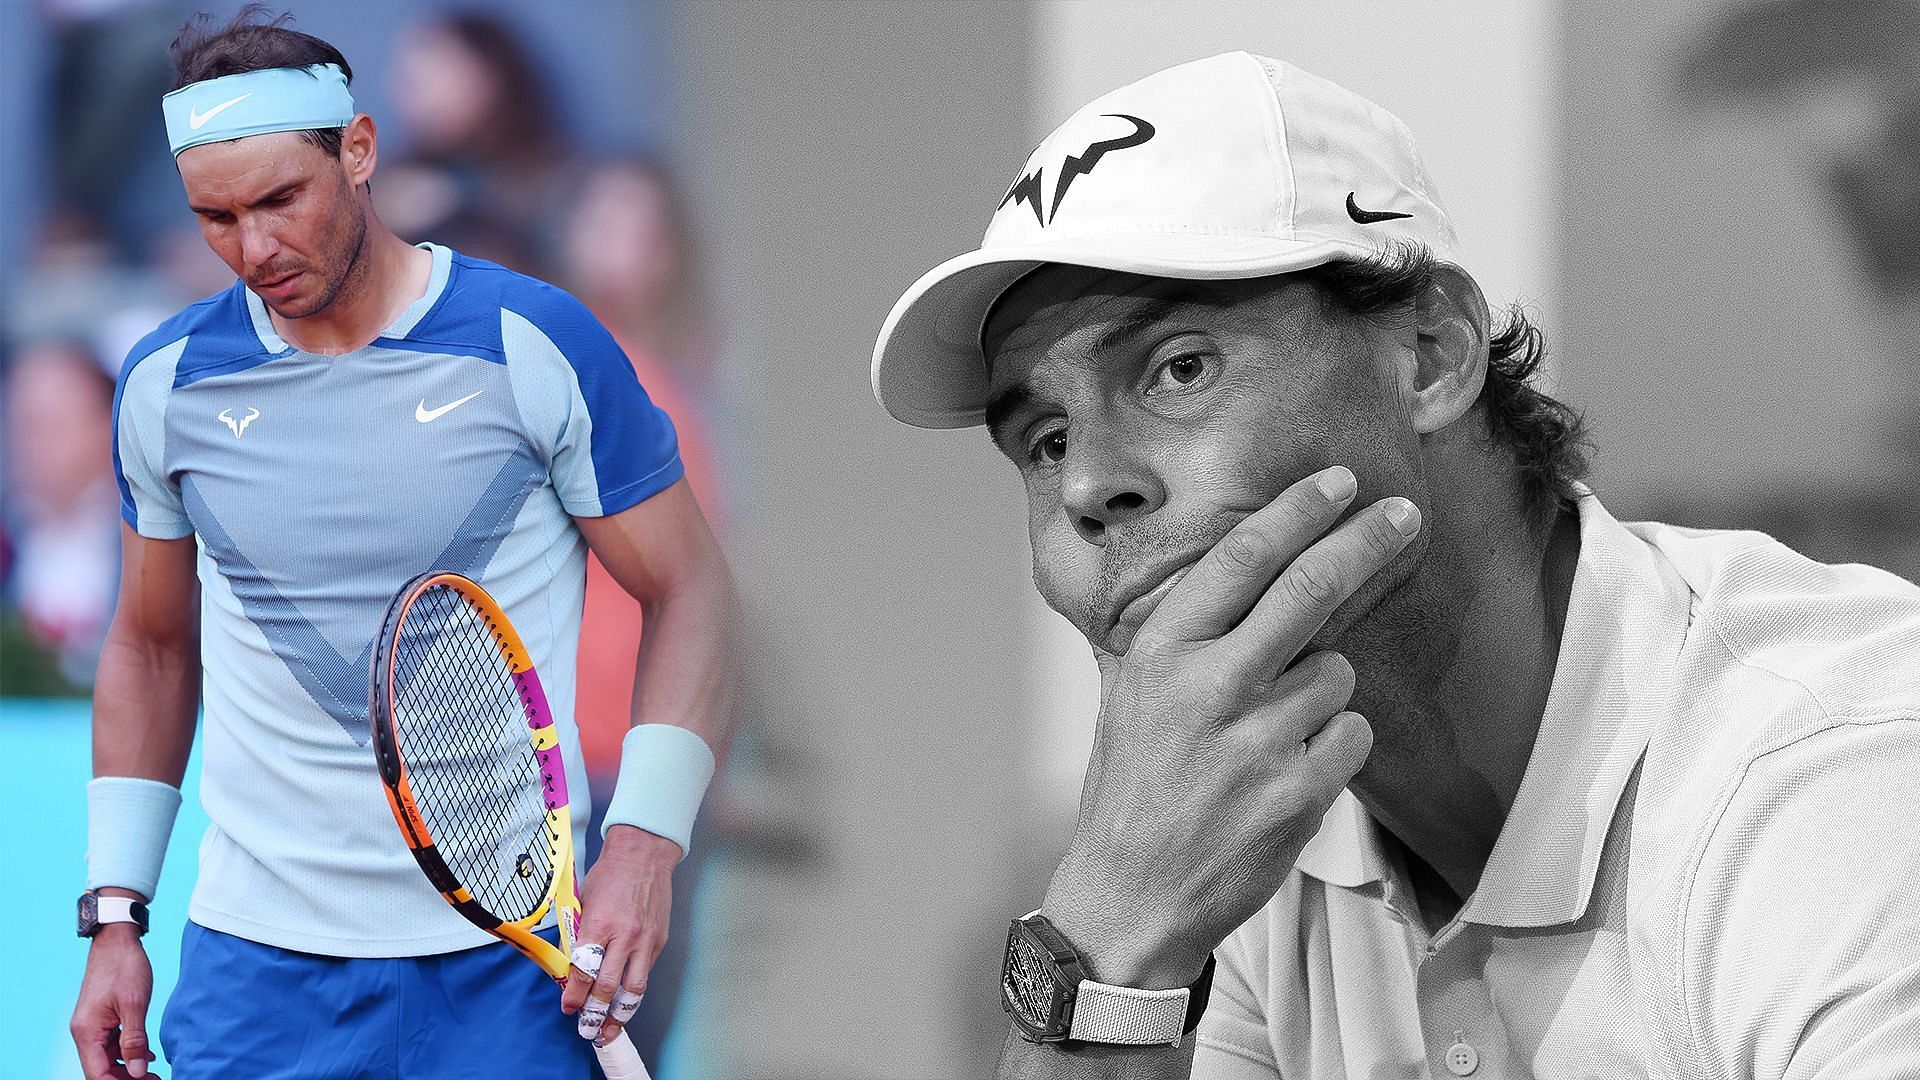 Rafael Nadal does not perceive himself as an &quot;unbreakable man.&quot;